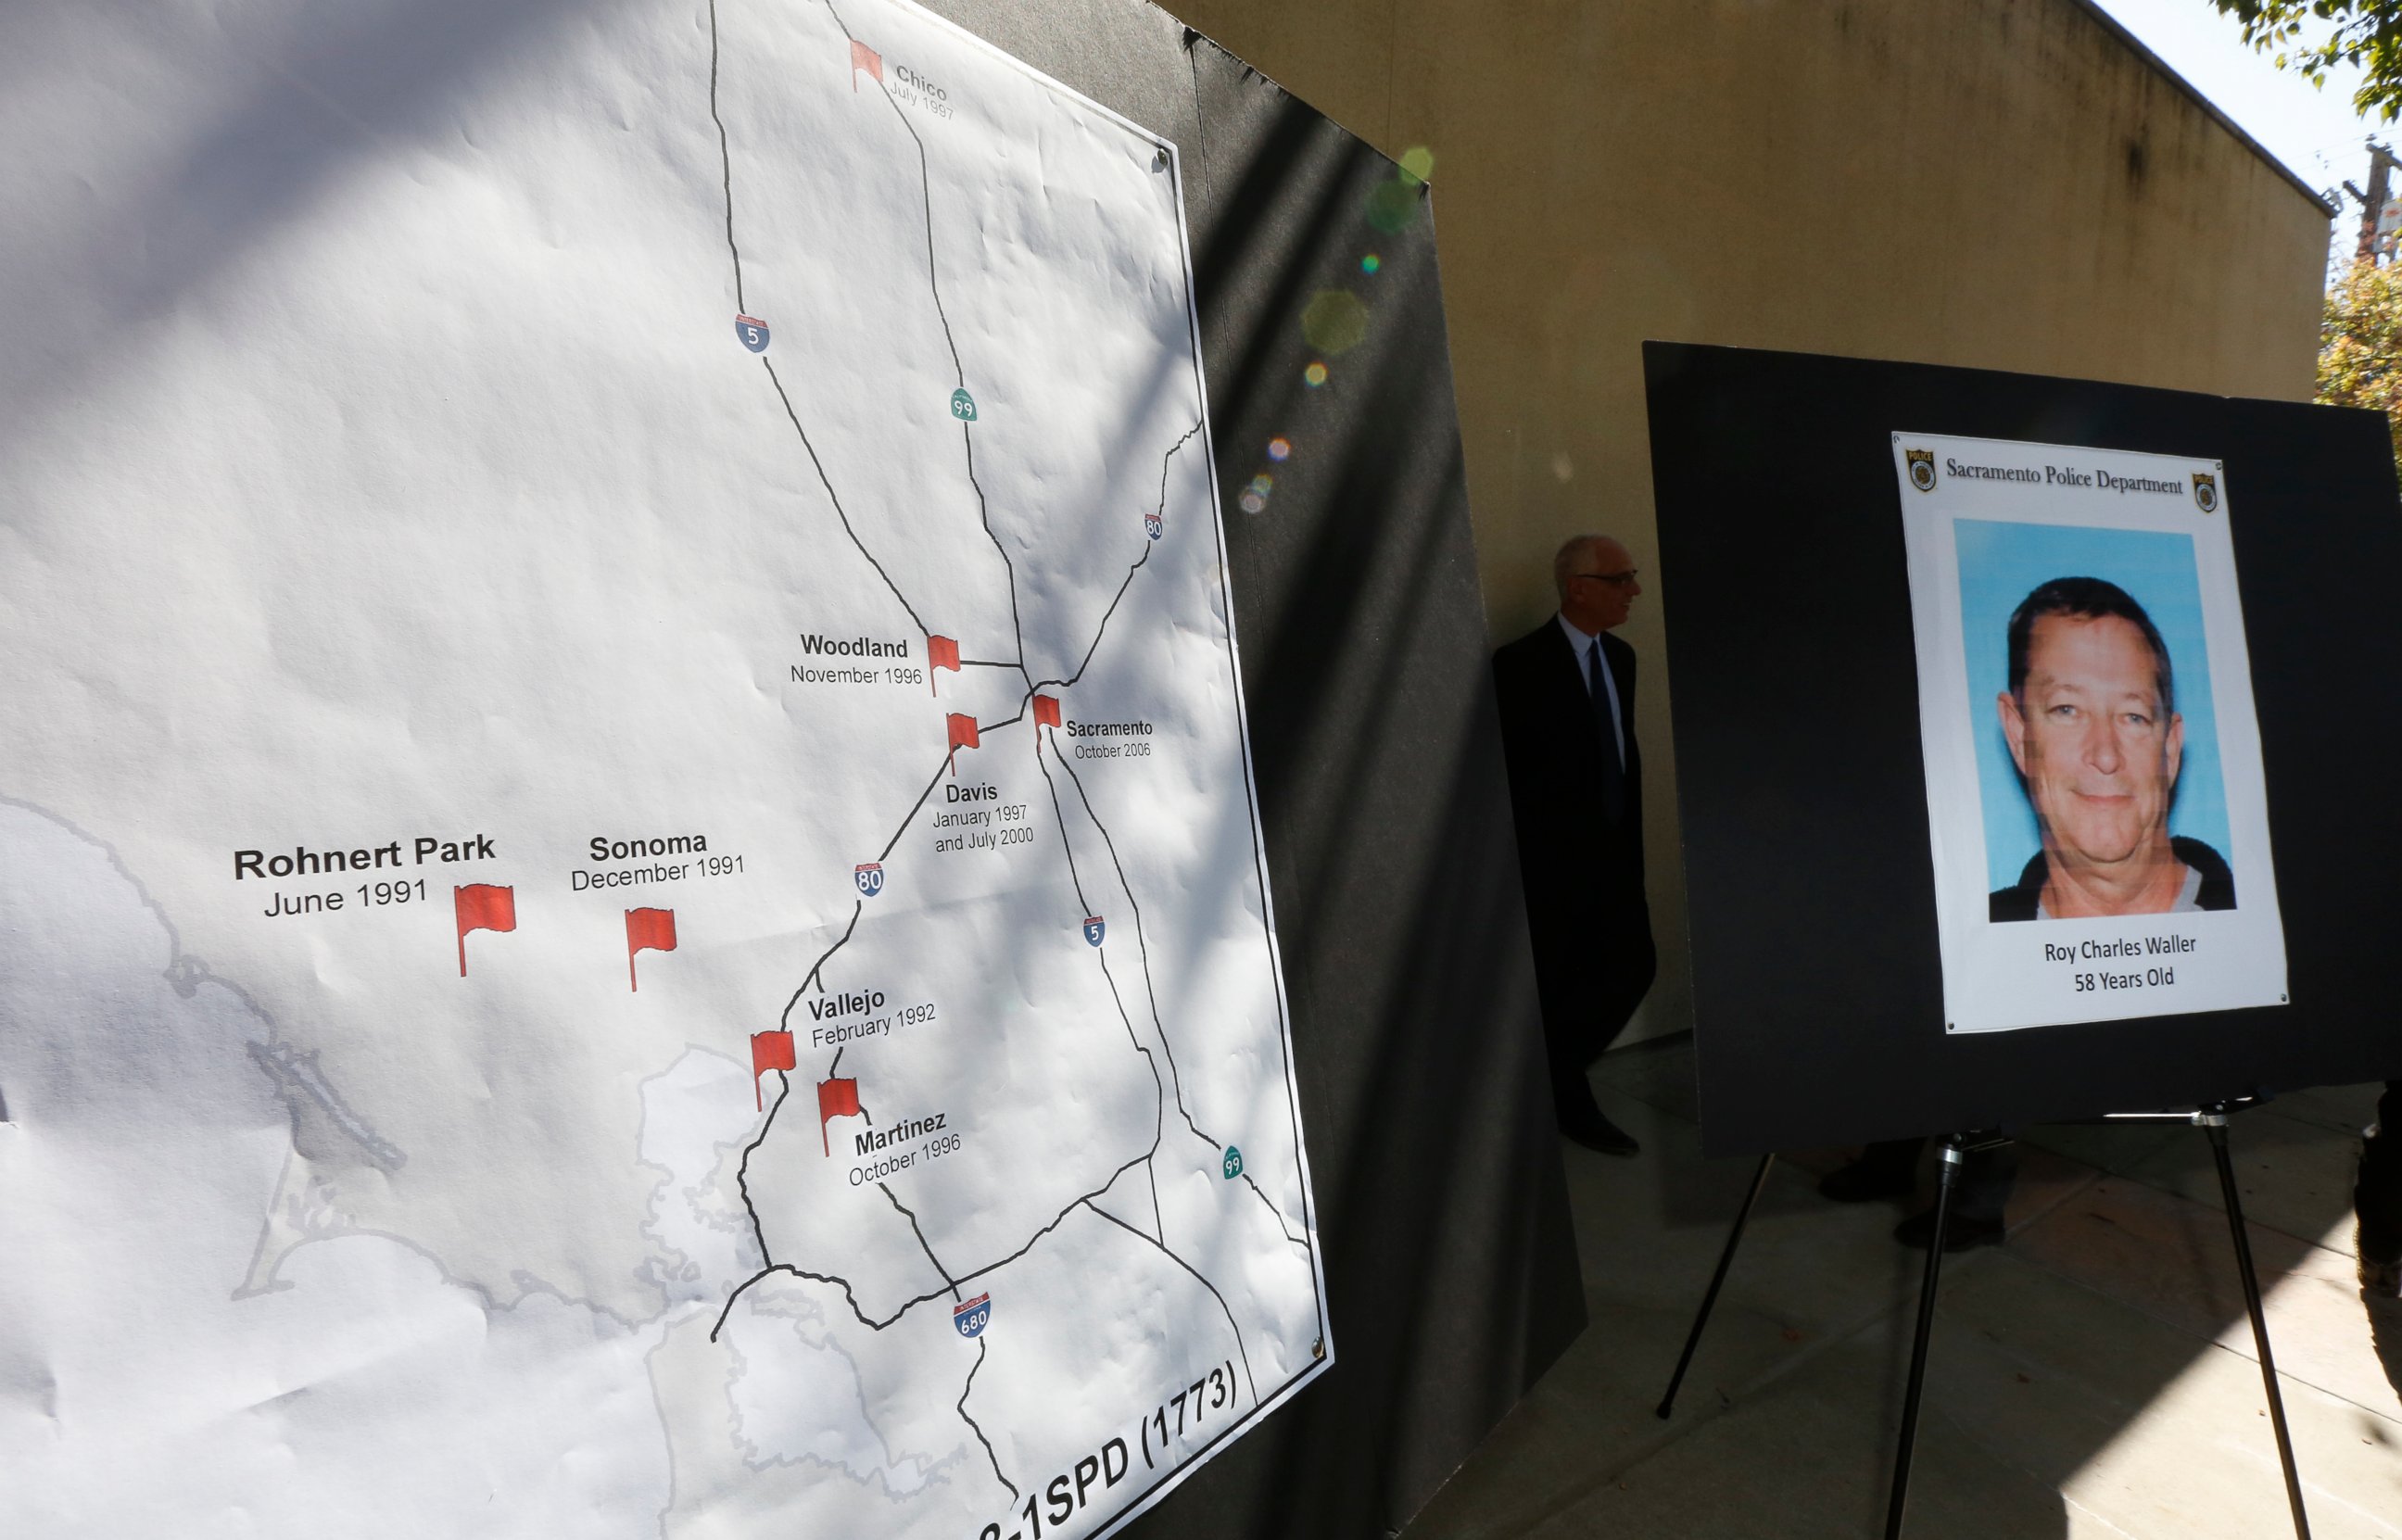 A map marks where a series of rapes in Northern California occurred starting in 1991, is displayed during a news conference Sept. 21, 2018, in Sacramento, Calif. Suspect Roy Charles Waller was taken into custody in Berkeley, Wednesday Sept. 20, 2018.